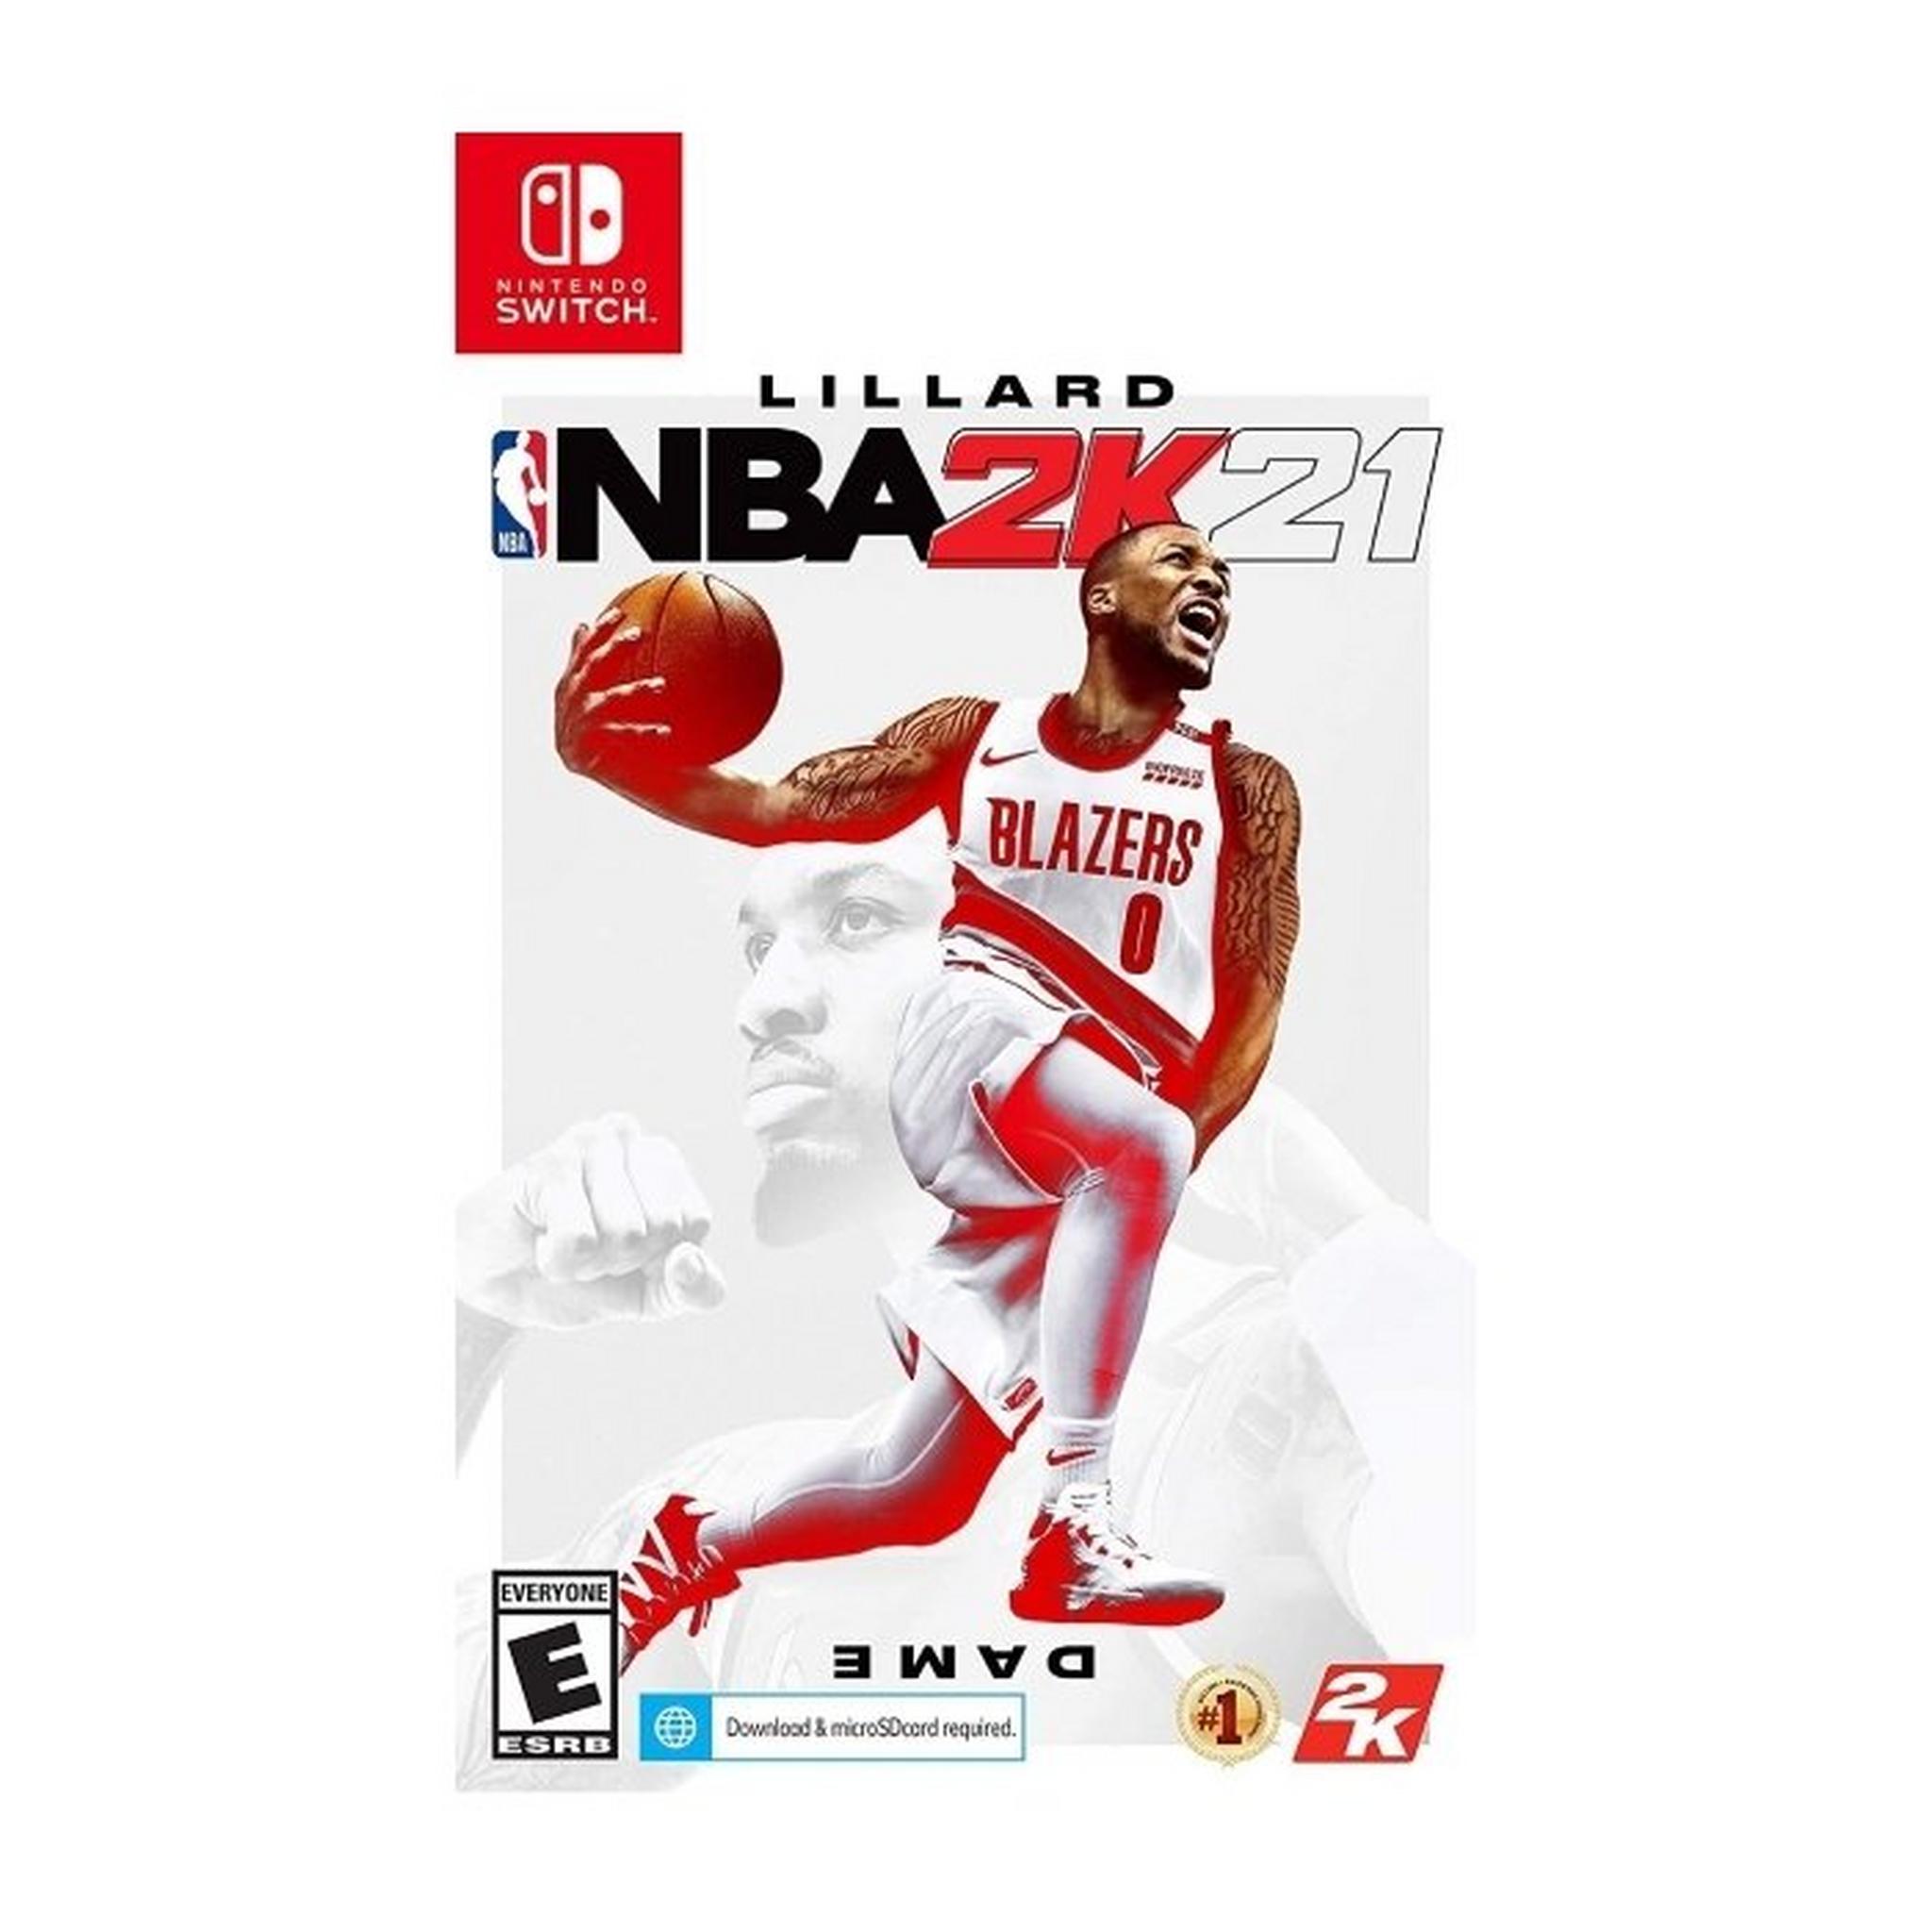 Nintendo Switch Console Neon Extended Battery + NBA2K21 Standard Edition - Nintendo Switch Game